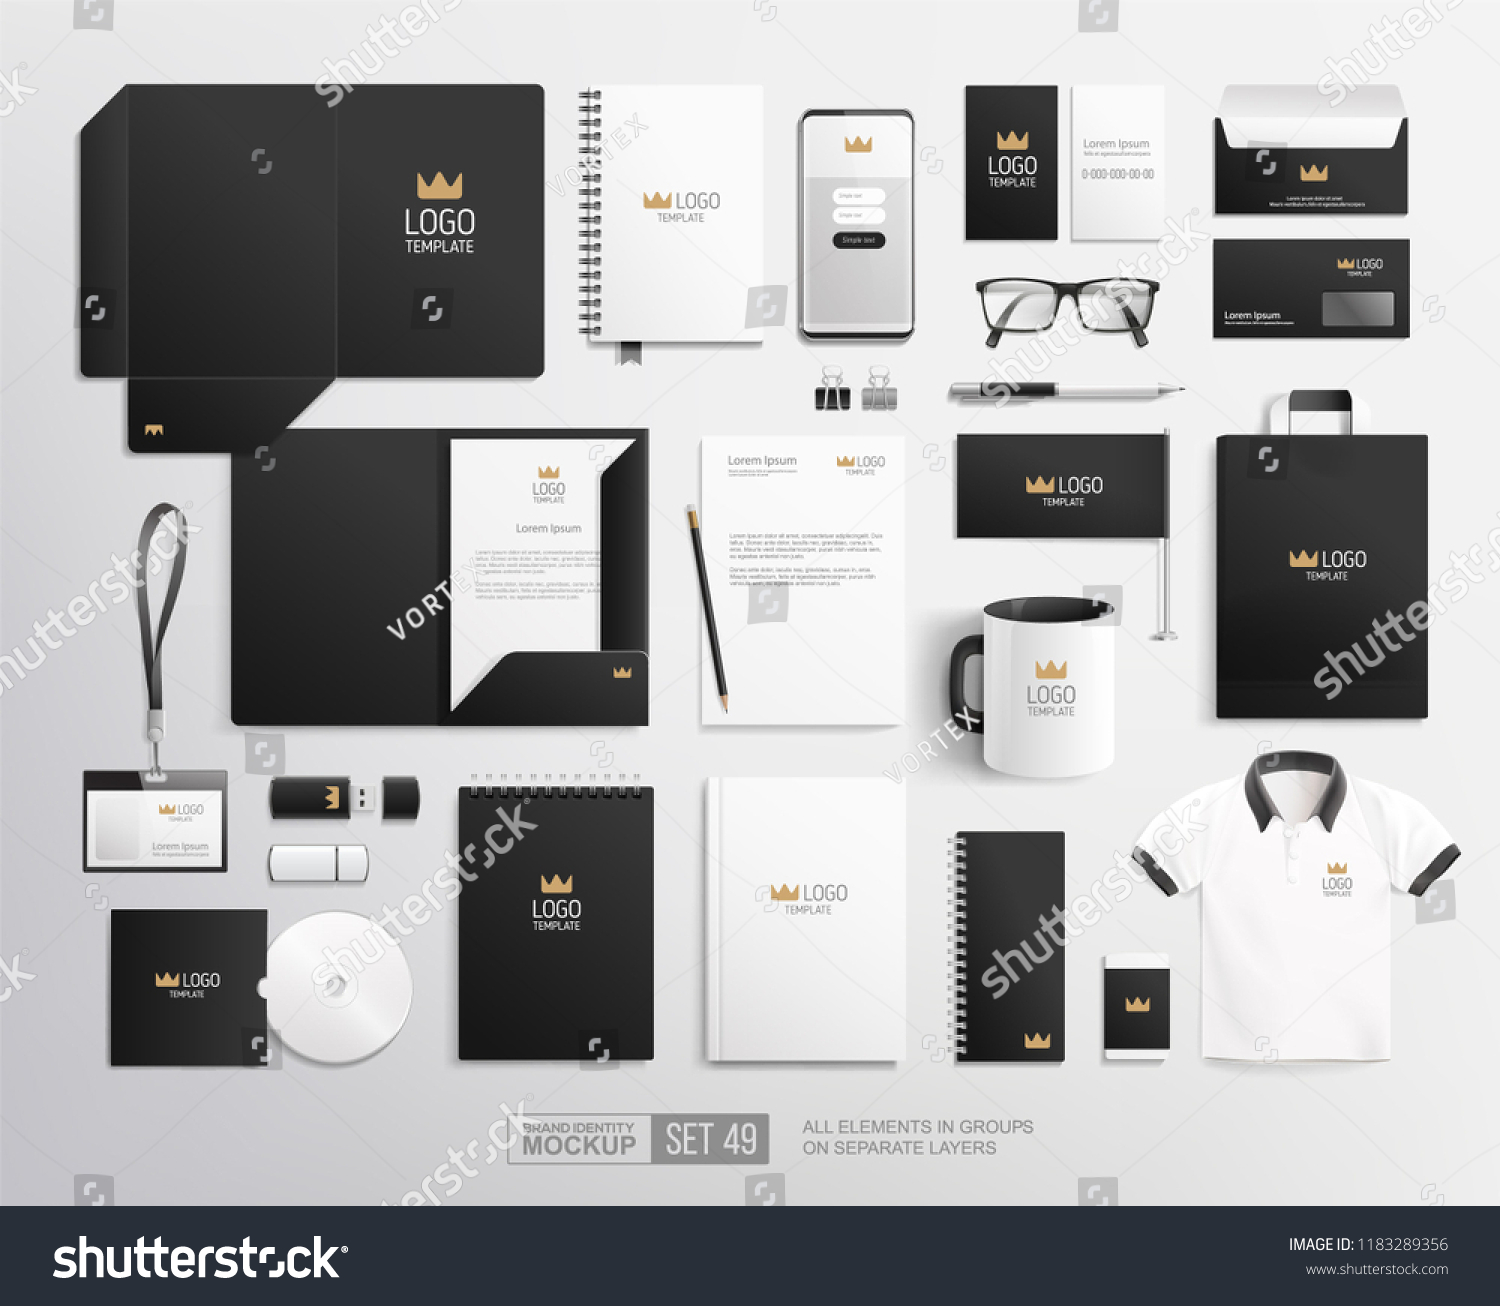 Download Realistic Business Stationary Corporate Identity Mockup Stock Vector Royalty Free 1183289356